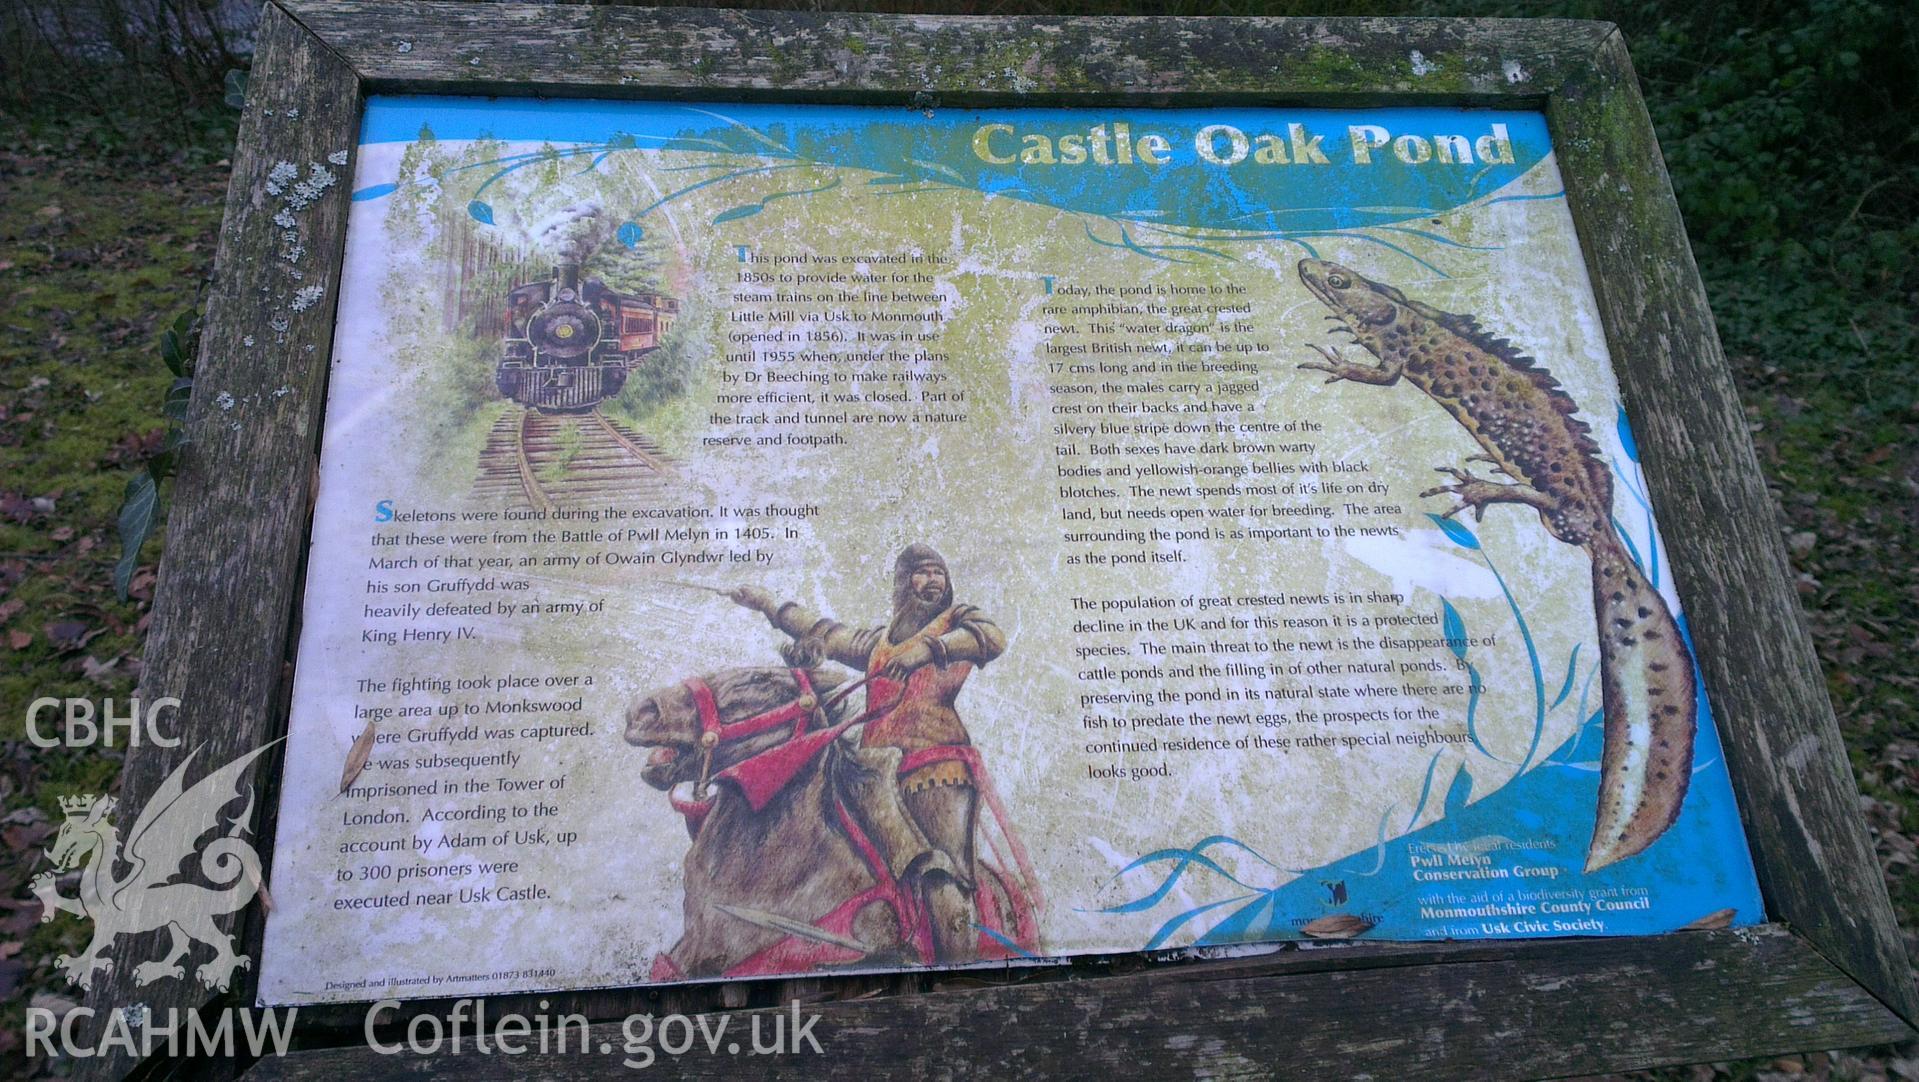 Digital colour photograph of information board at Pwll Melyn battlefield. Photographed during Phase Three of the Welsh Battlefield Metal Detector Survey, carried out by Archaeology Wales, 2012-2014. Project code: 2041 - WBS/12/SUR.